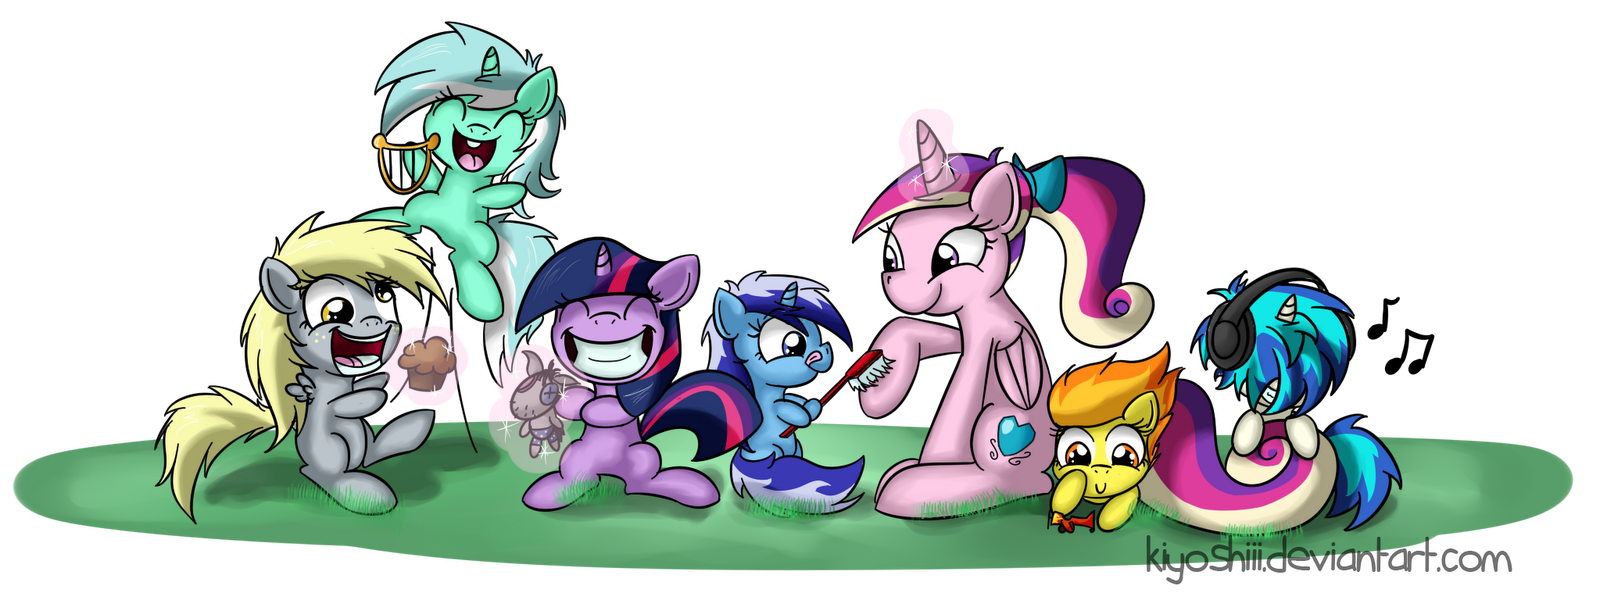 [Obrázek: best_foal_sitter_in_all_over_equestria_b...4ypqwy.png]